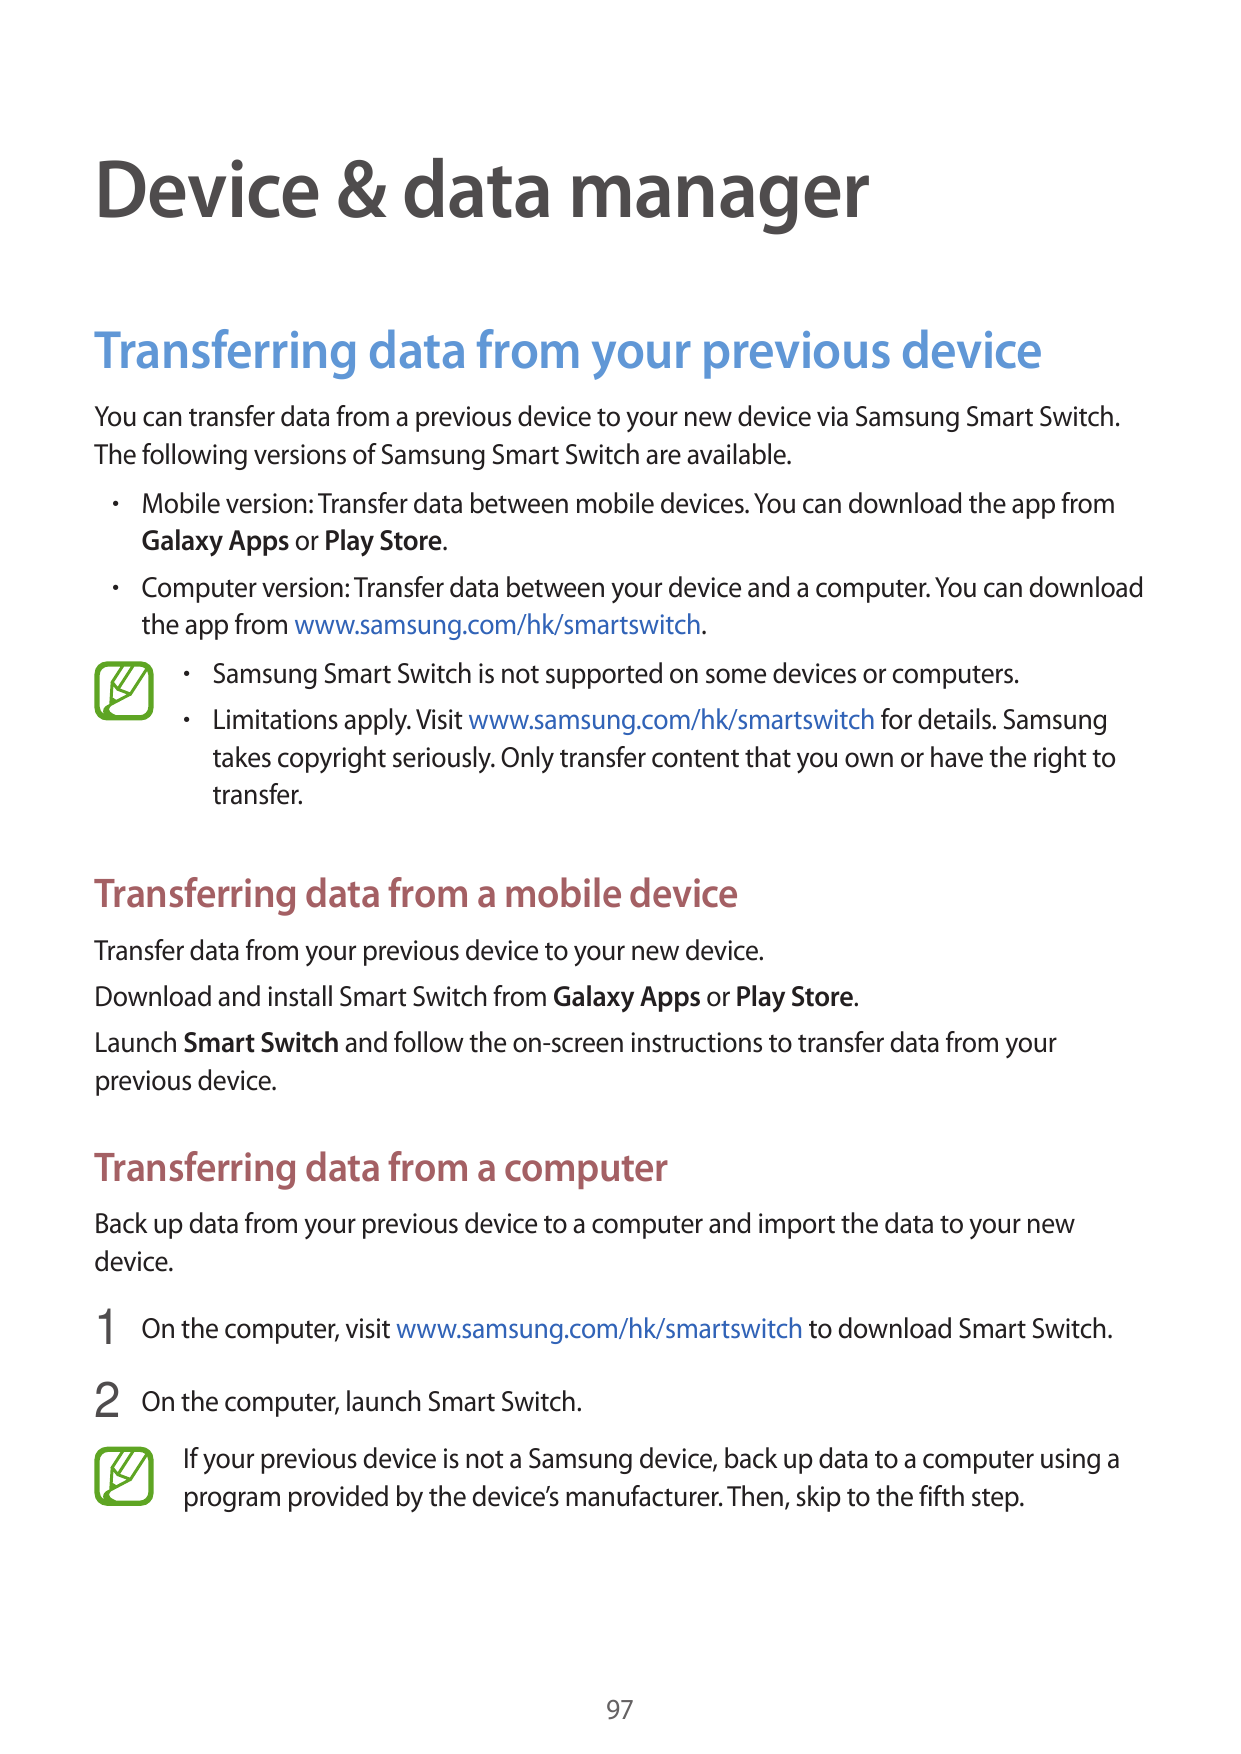 Device & data managerTransferring data from your previous deviceYou can transfer data from a previous device to your new device 